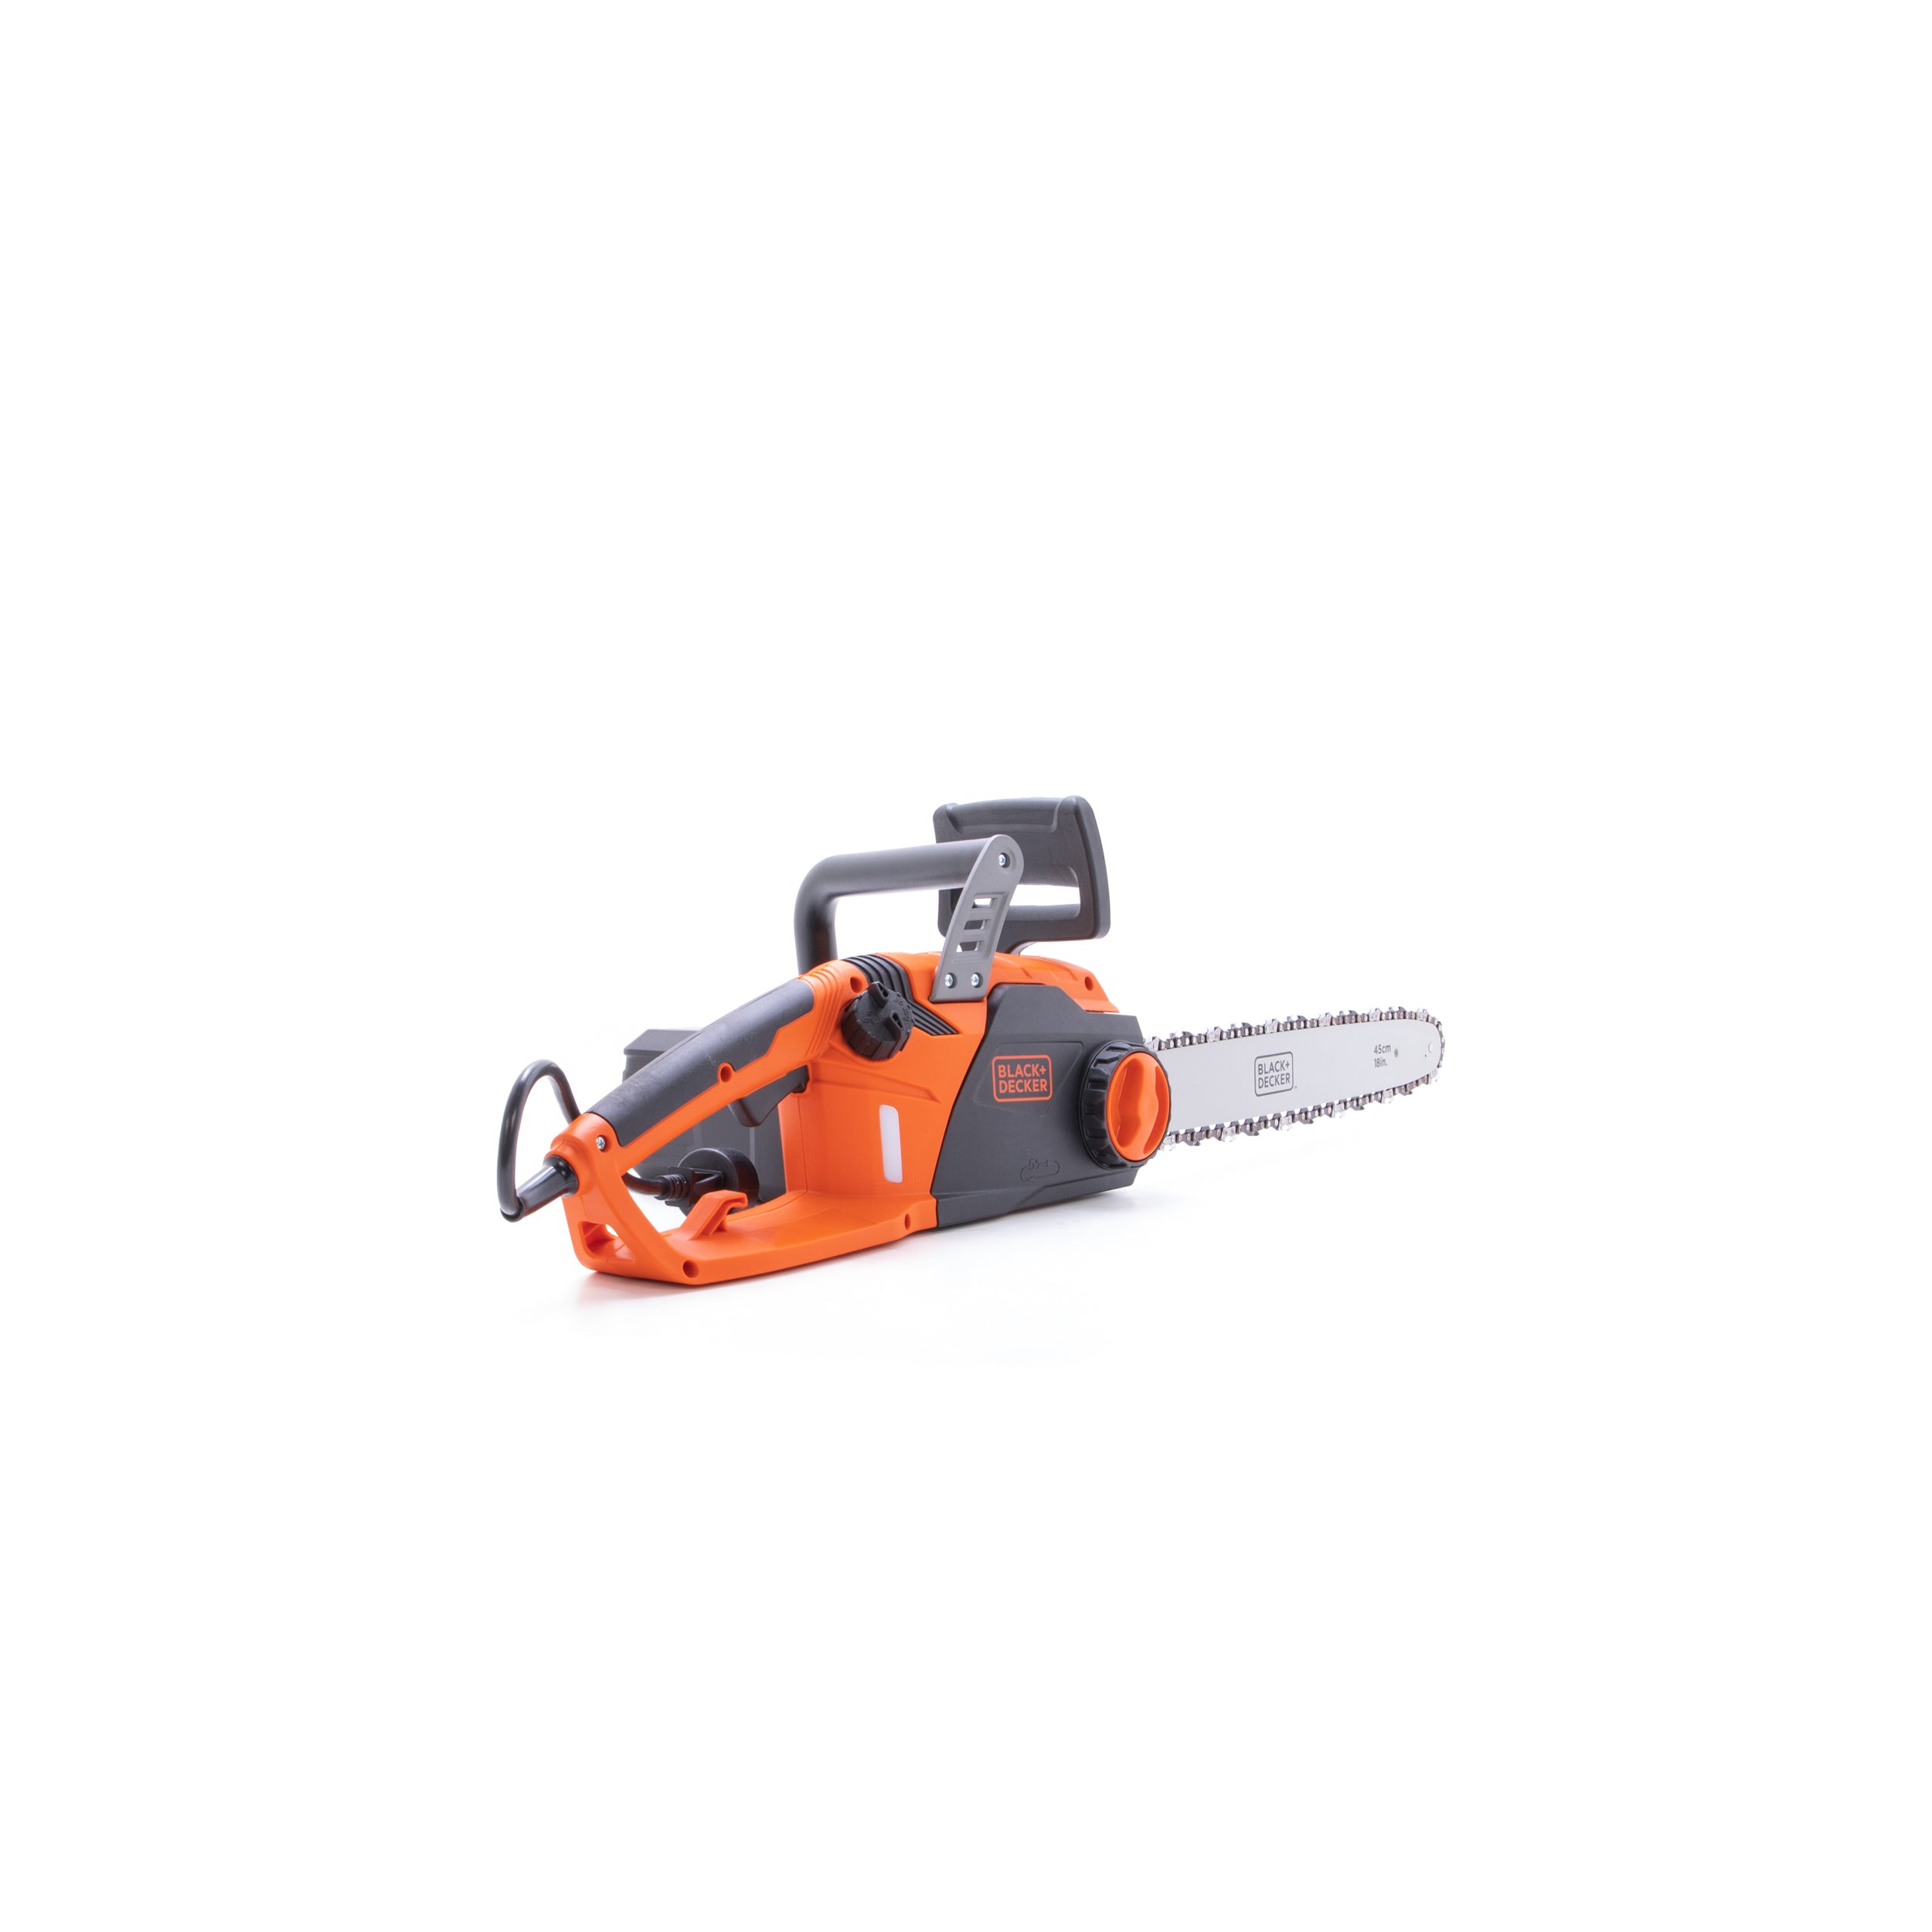 BLACK+DECKER Electric Chainsaw, 18-Inch, 15-Amp, Corded (CS1518)